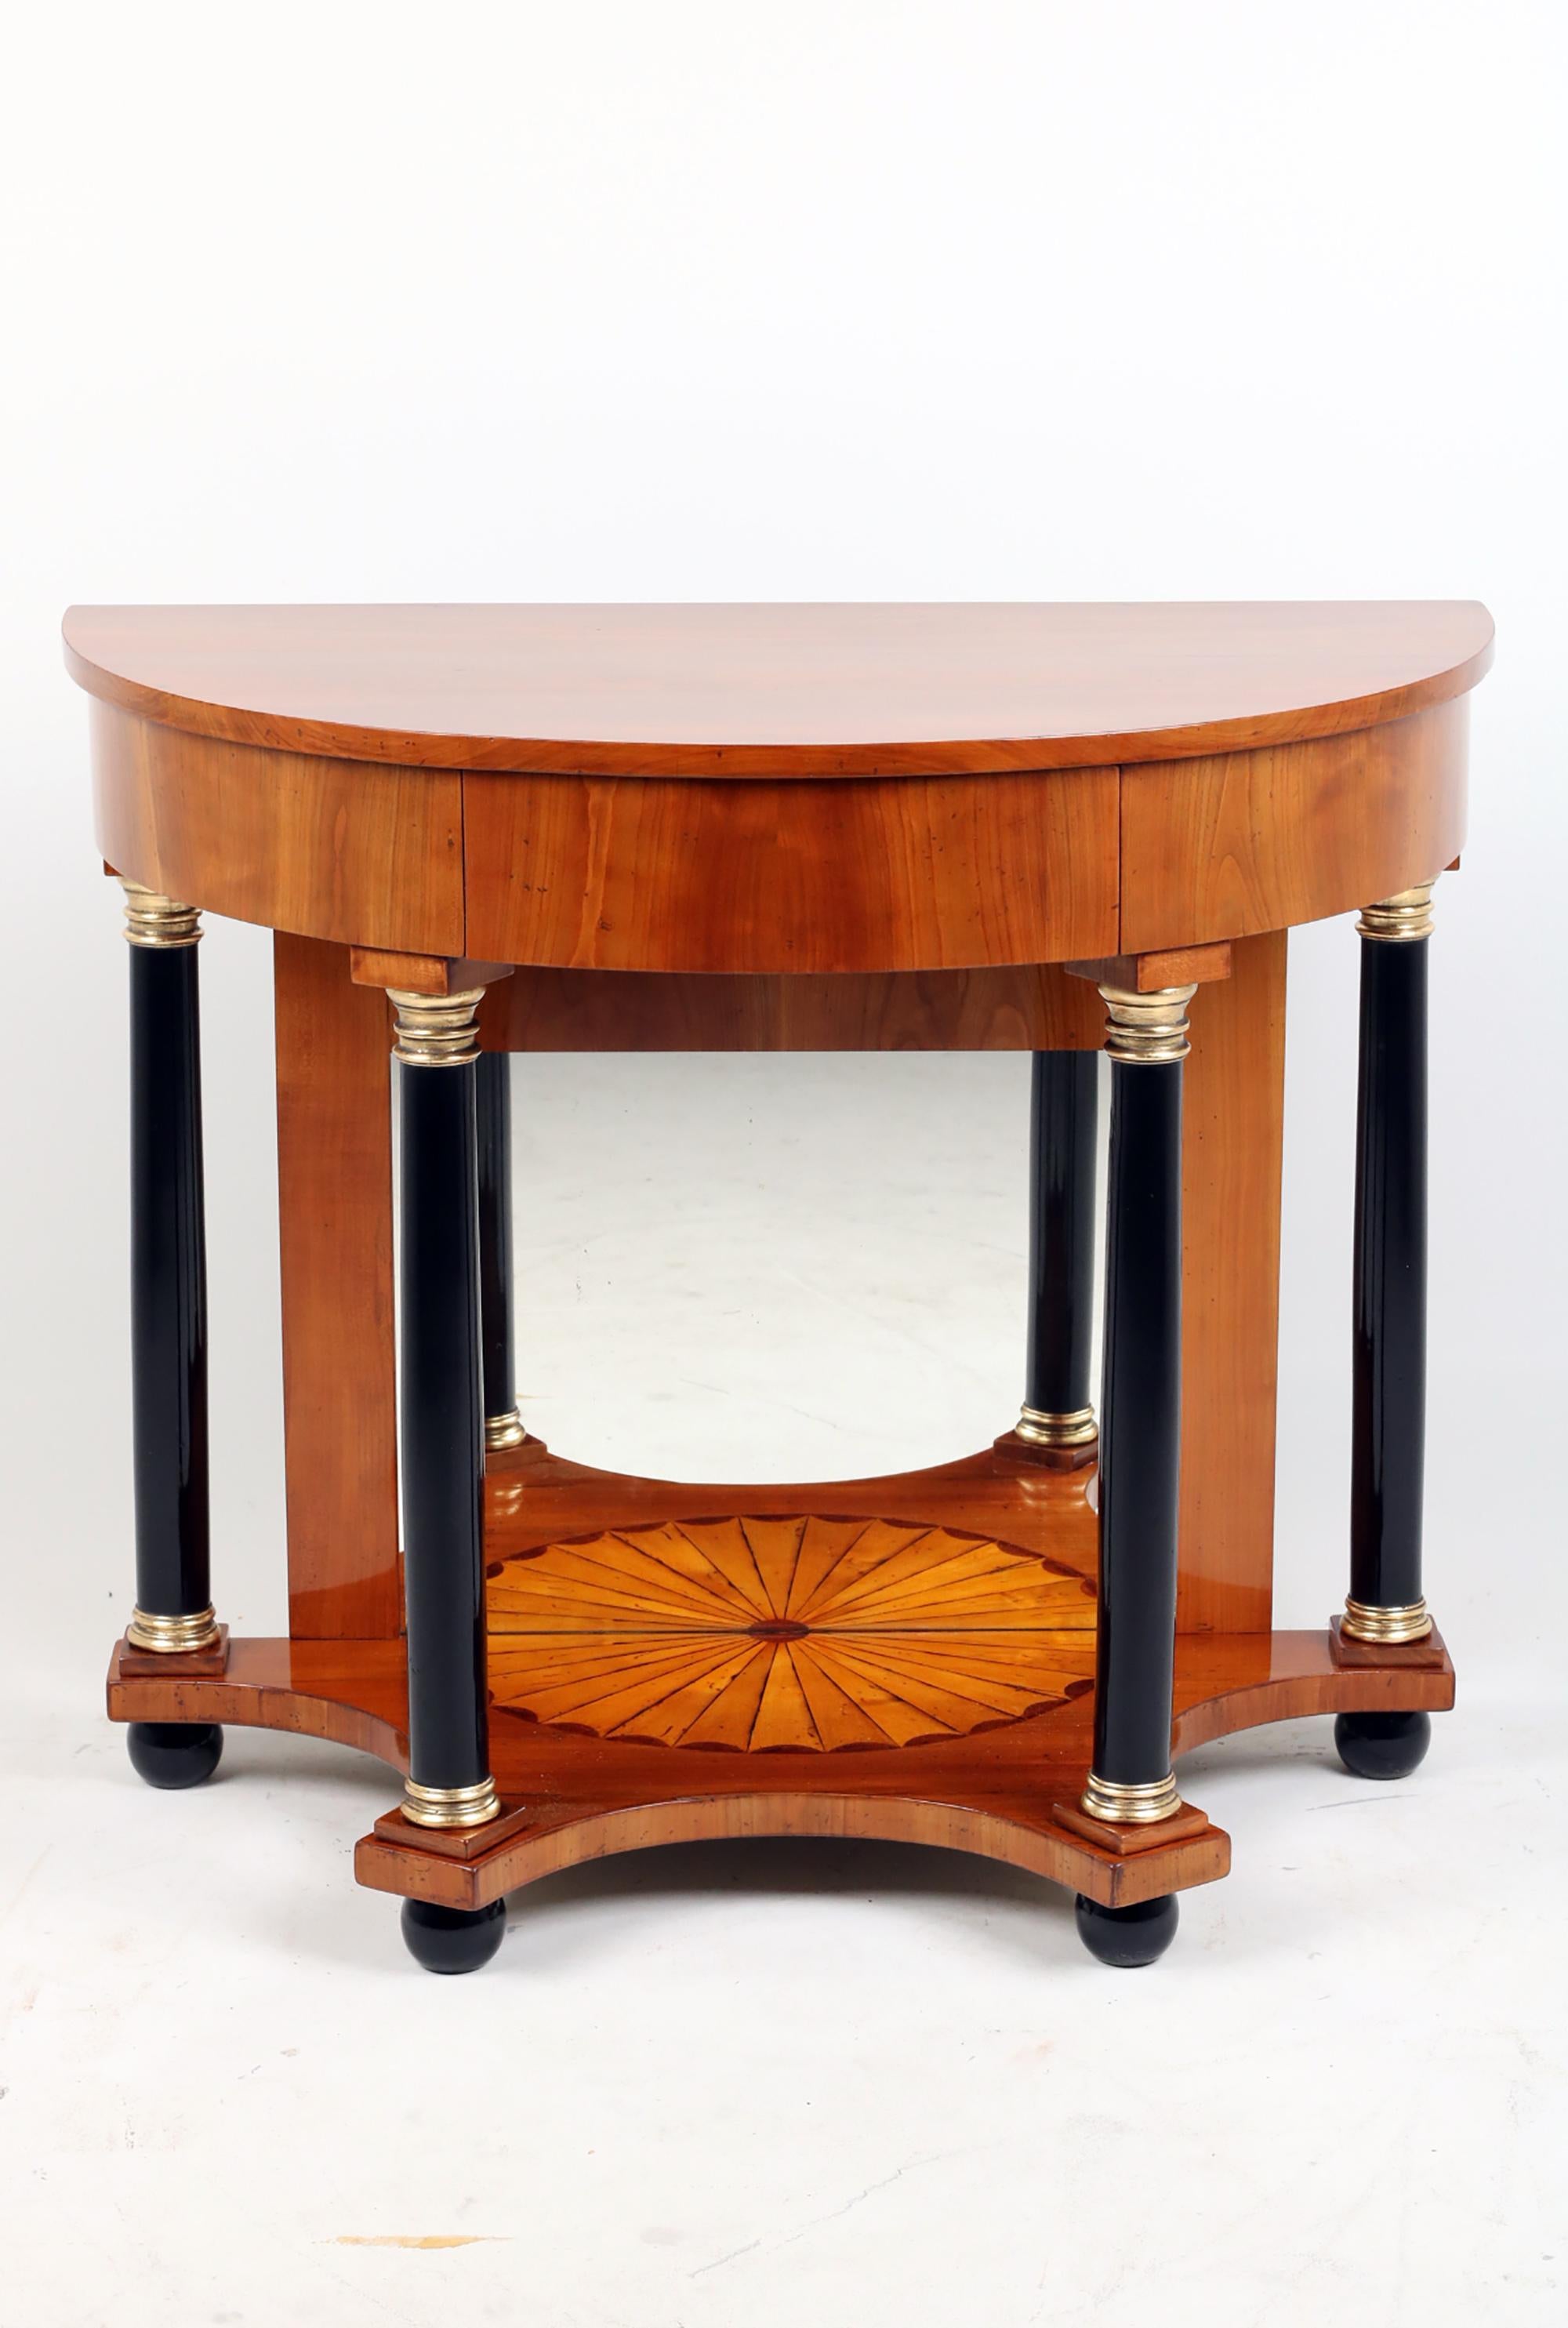 Console, Cherry wood,  1820 Vienna
Standing on four ebonized spherical legs rare Biedermeier console with cherry wood veneered. 
The bottom plate decorated with half circle shape marquetry with fire shading. Mirror on the back. The frame is hold by